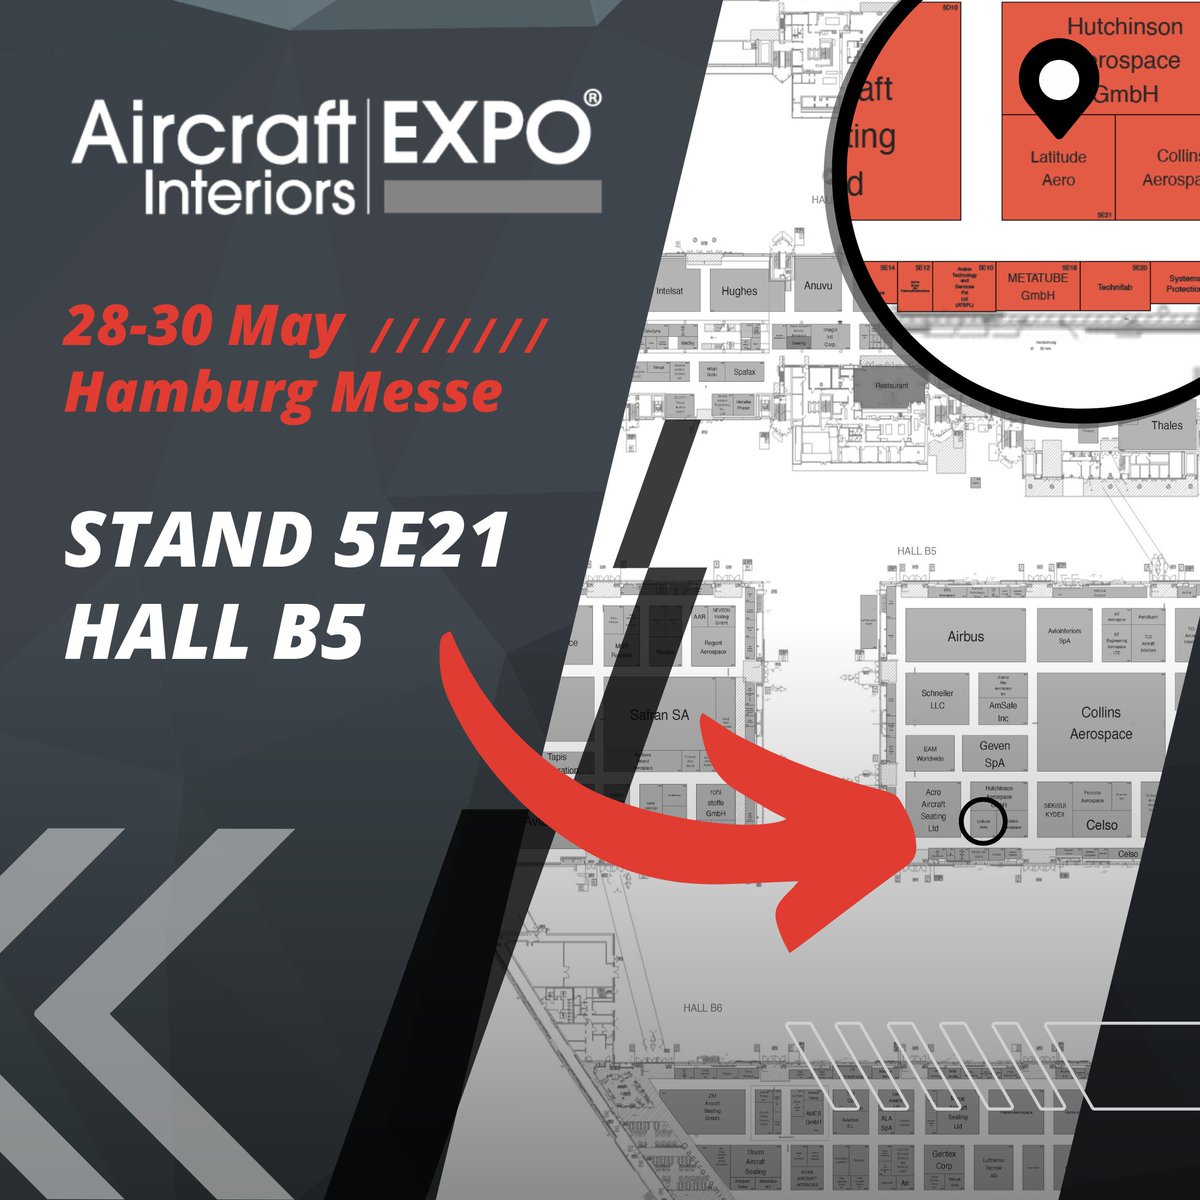 🛫 #AIX2024 is right around the corner! 🛫 Have you secured your meeting with the Latitude Aero sales team yet? Send us an email today at sales@latitude-aero.com to claim your spot before they’re gone! ⏰ #AIX #LatitudeAero #BookYourMeeting #PaxEx #AvGeek #Aviation #Hamburg…